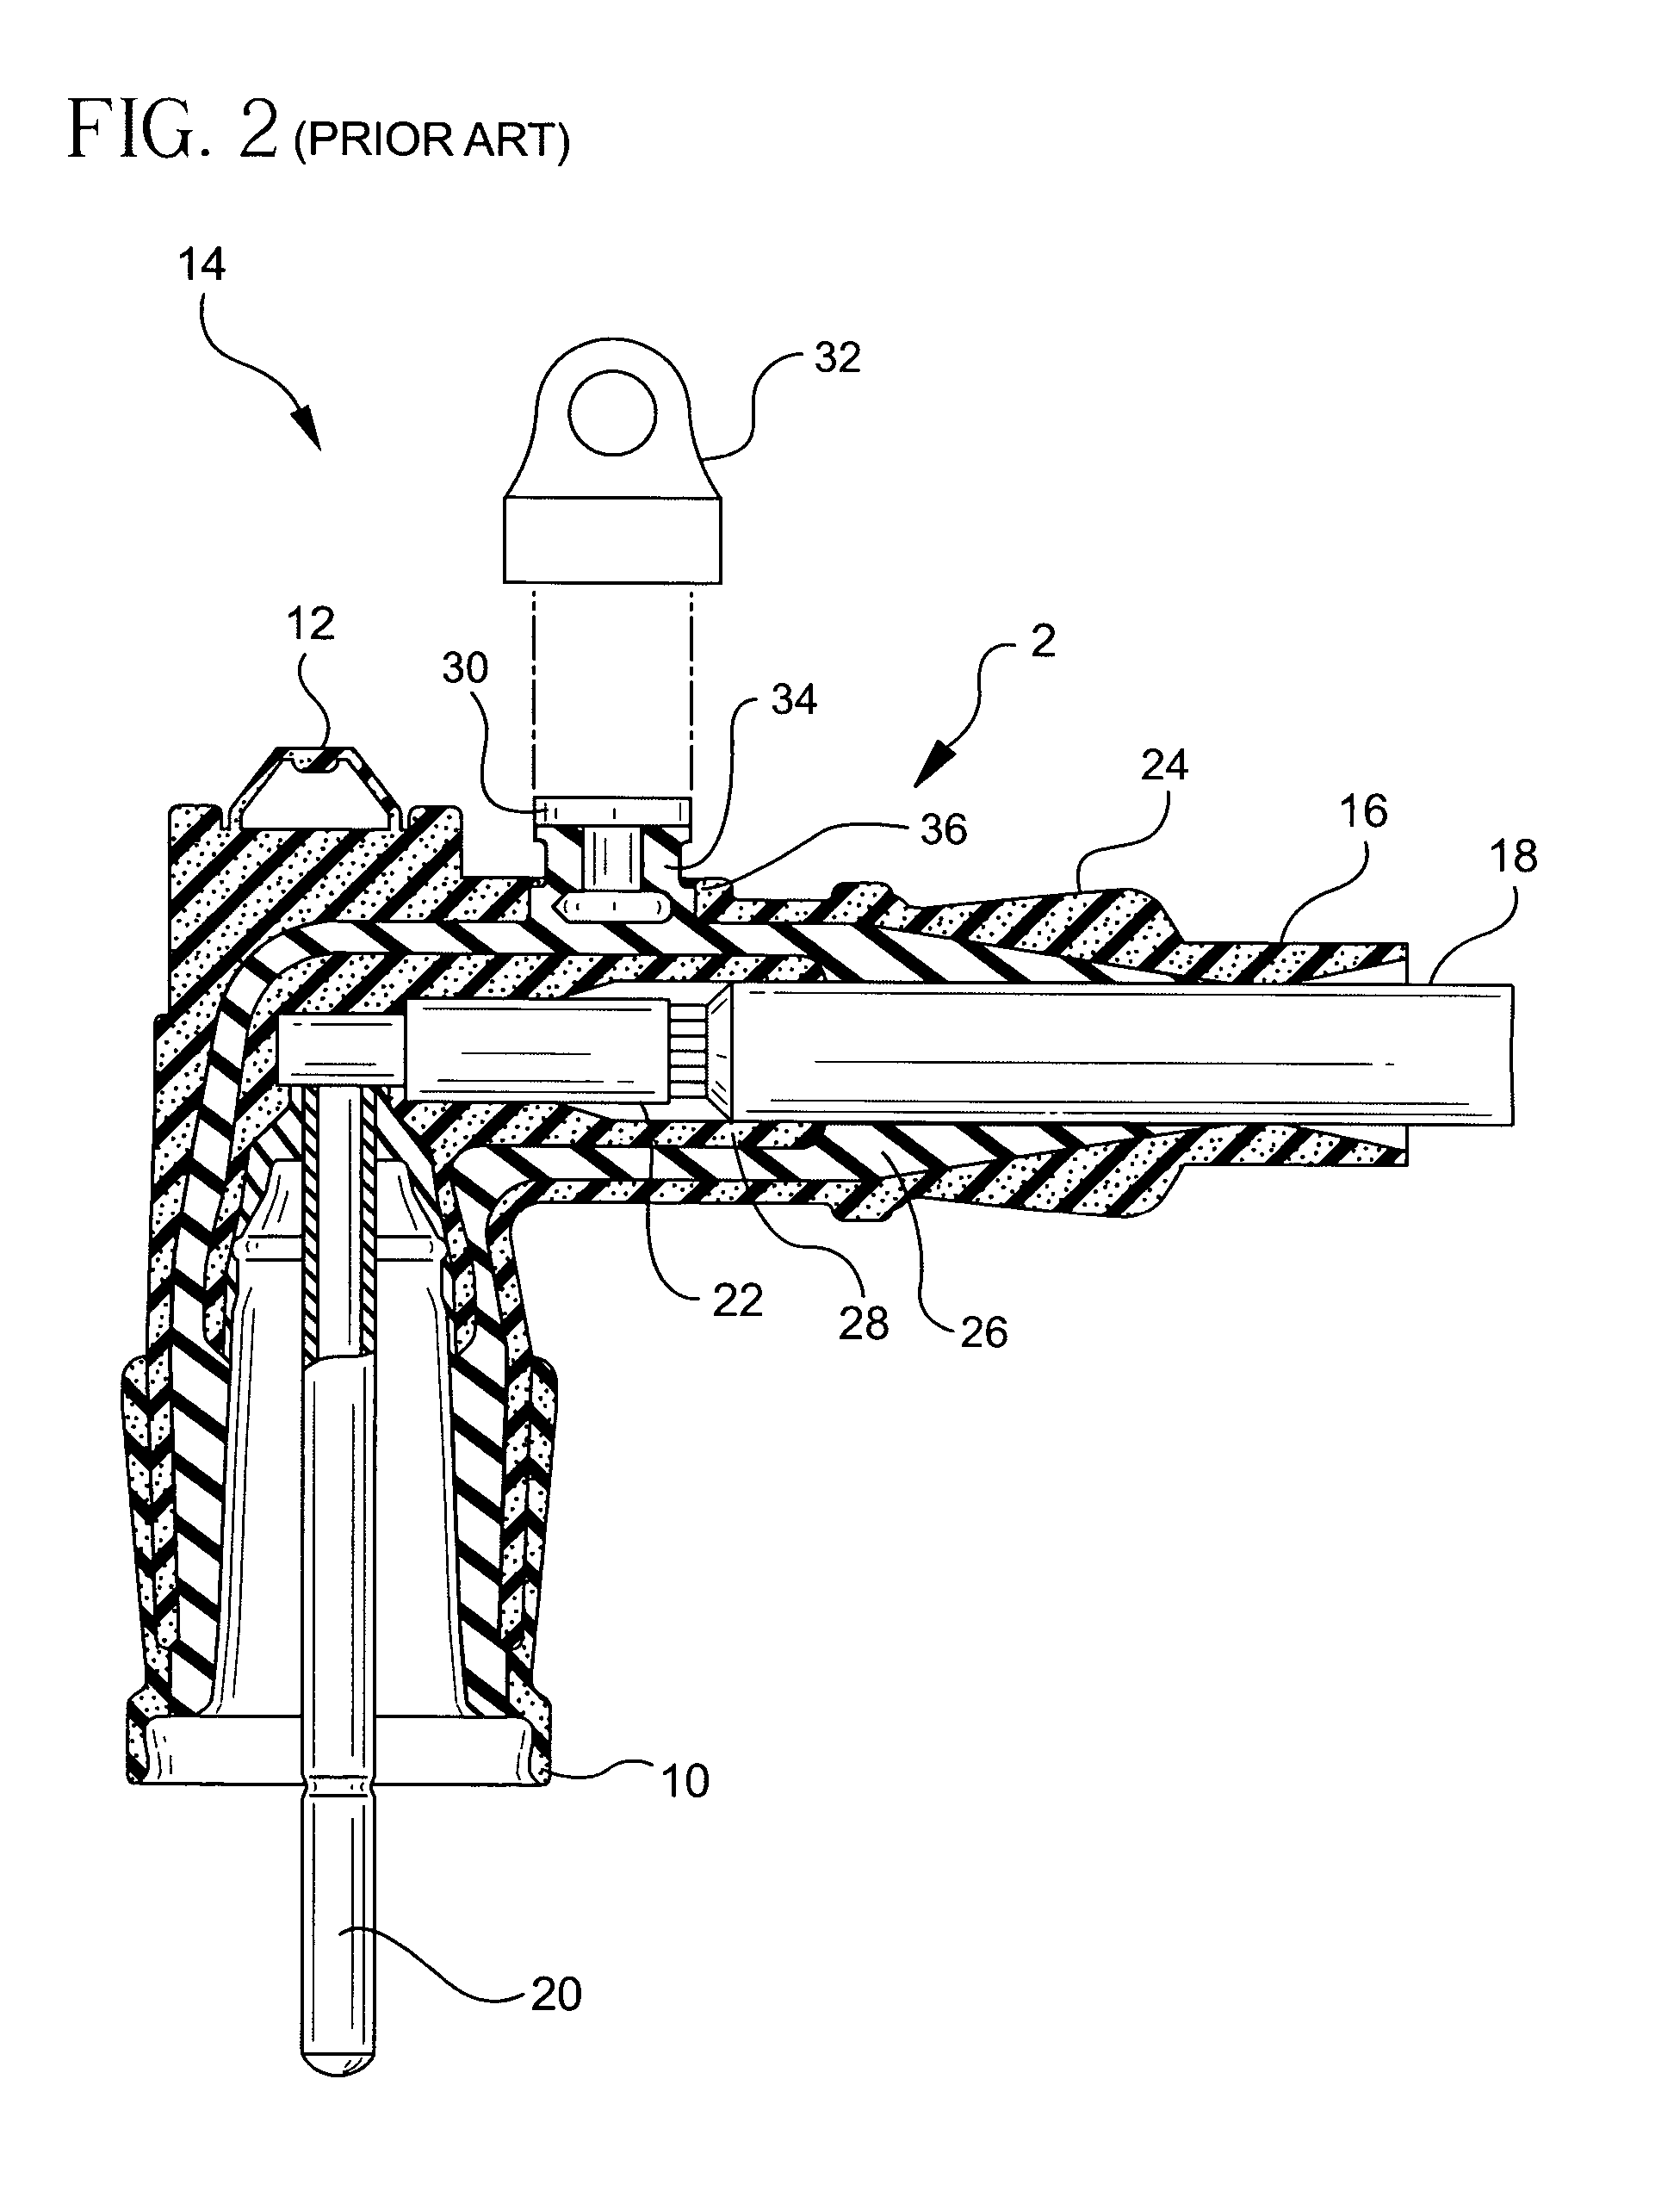 Method for forming an electrical connector with voltage detection point insulation shield